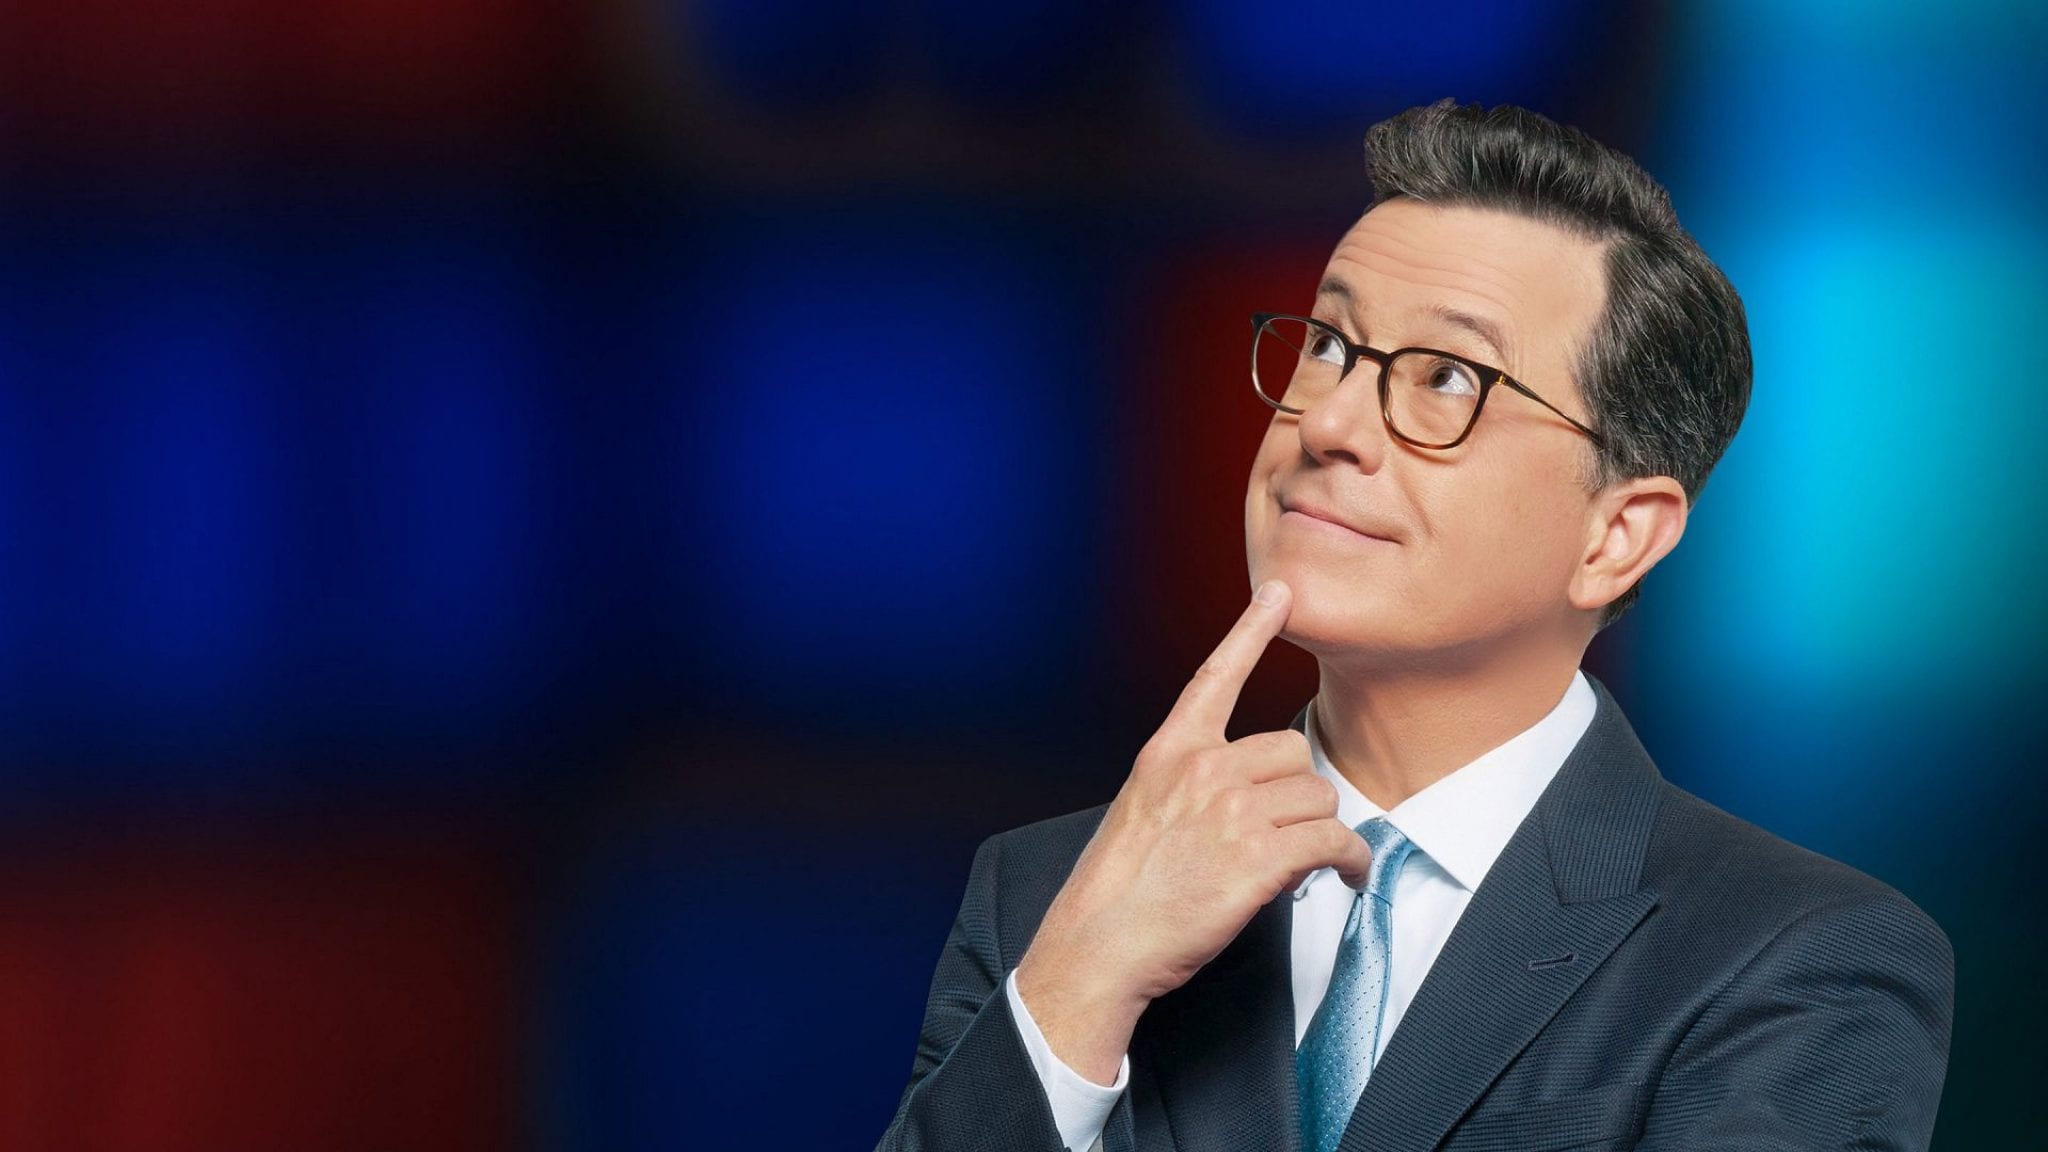 Image of The Great One, Stephen Colbert